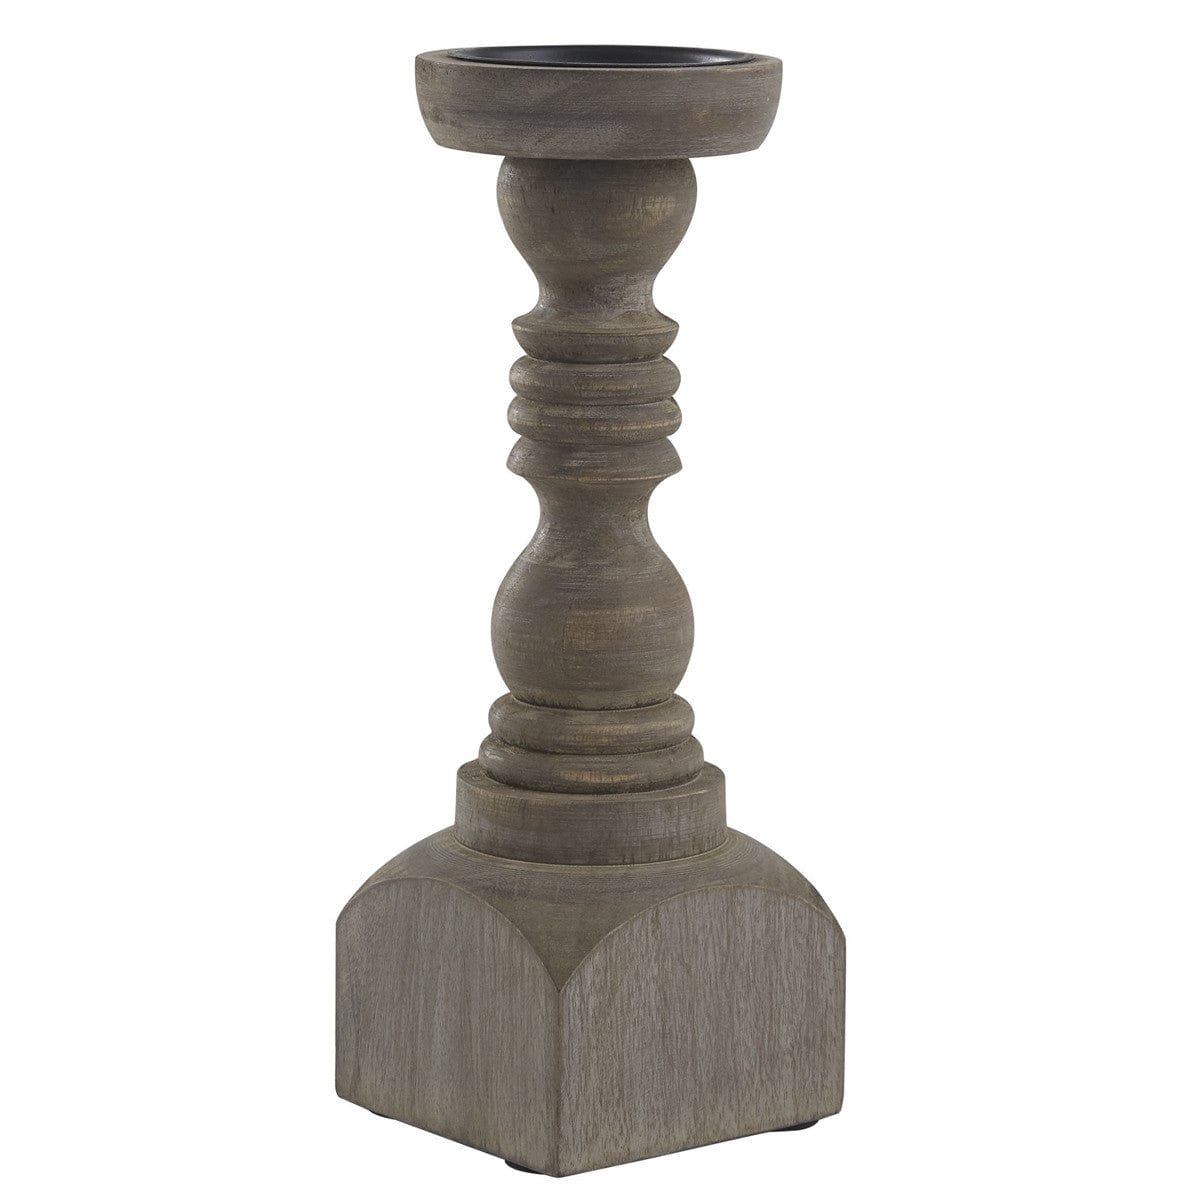 Wood Brighton Candlestick Candle Holder For Pillar Candles - 12&quot; High-Park Designs-The Village Merchant